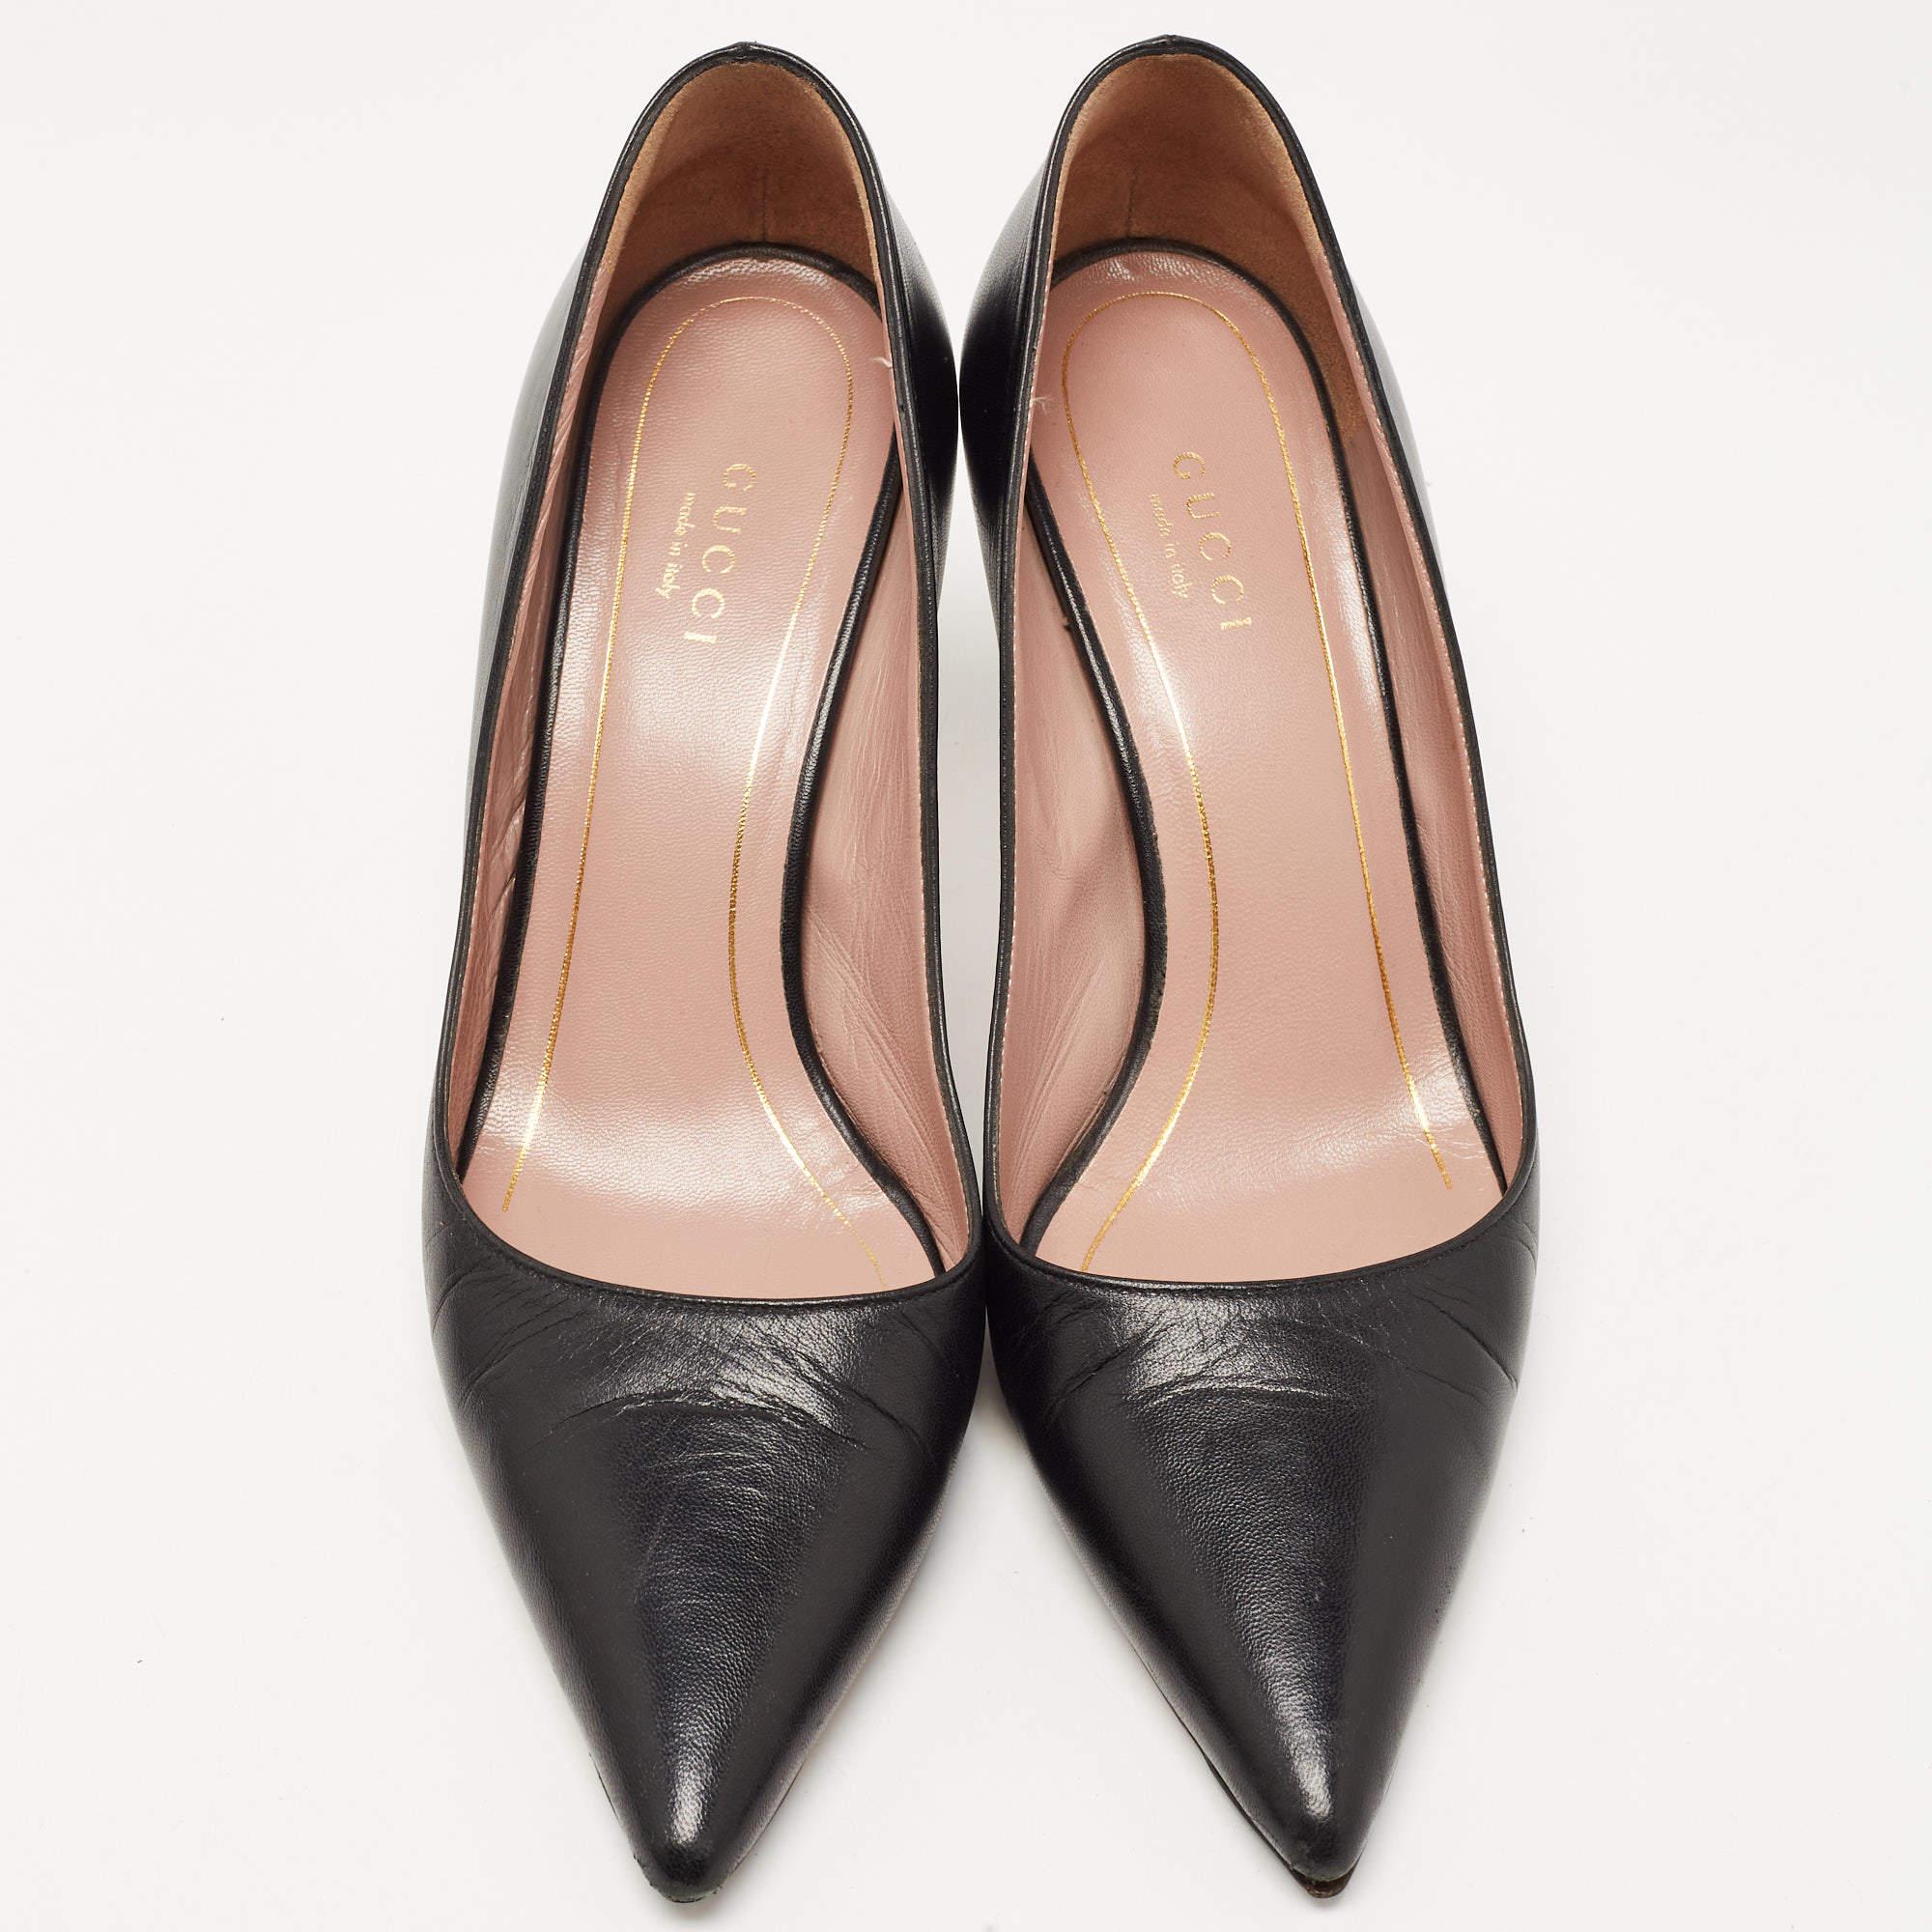 Exhibit an elegant style with this pair of pumps. These Gucci black shoes for women are crafted from quality leather in a pointed-toe design. They are set on durable soles and sleek heels.

